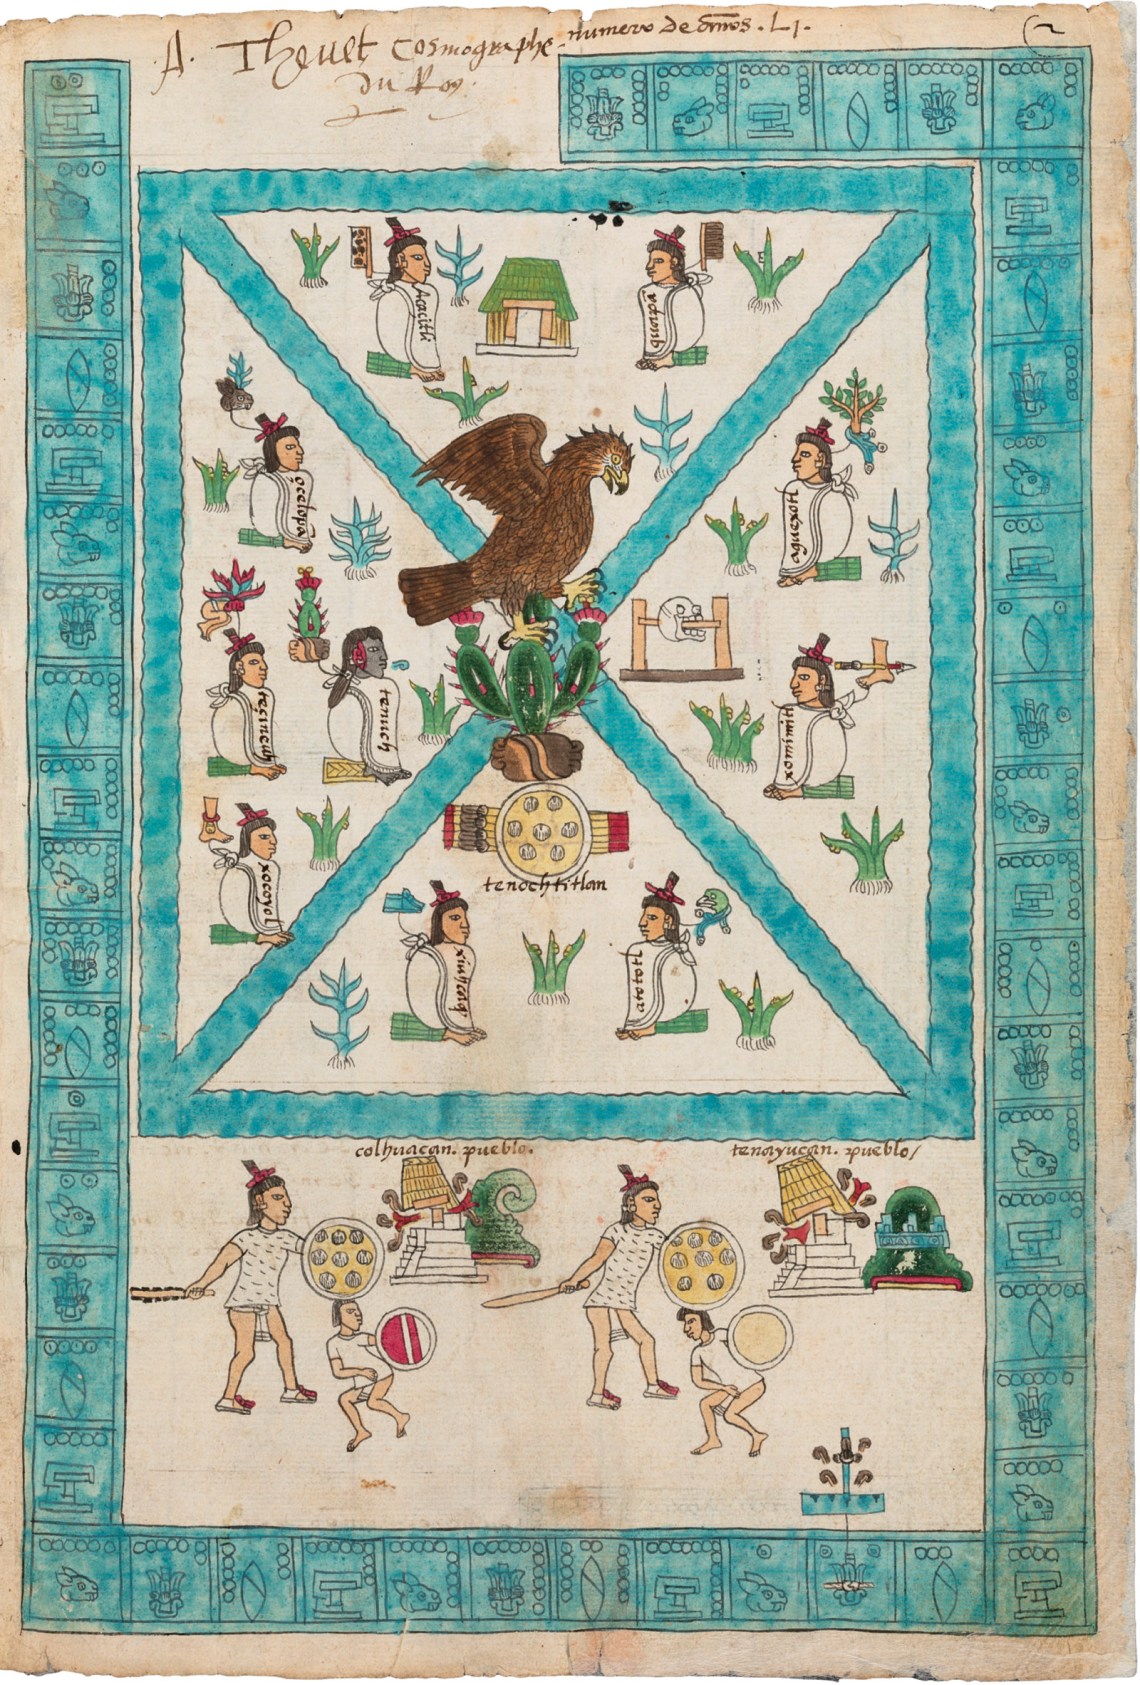 Illustration from the Codex Mendoza of the founding of the Aztec capital Tenochtitlan